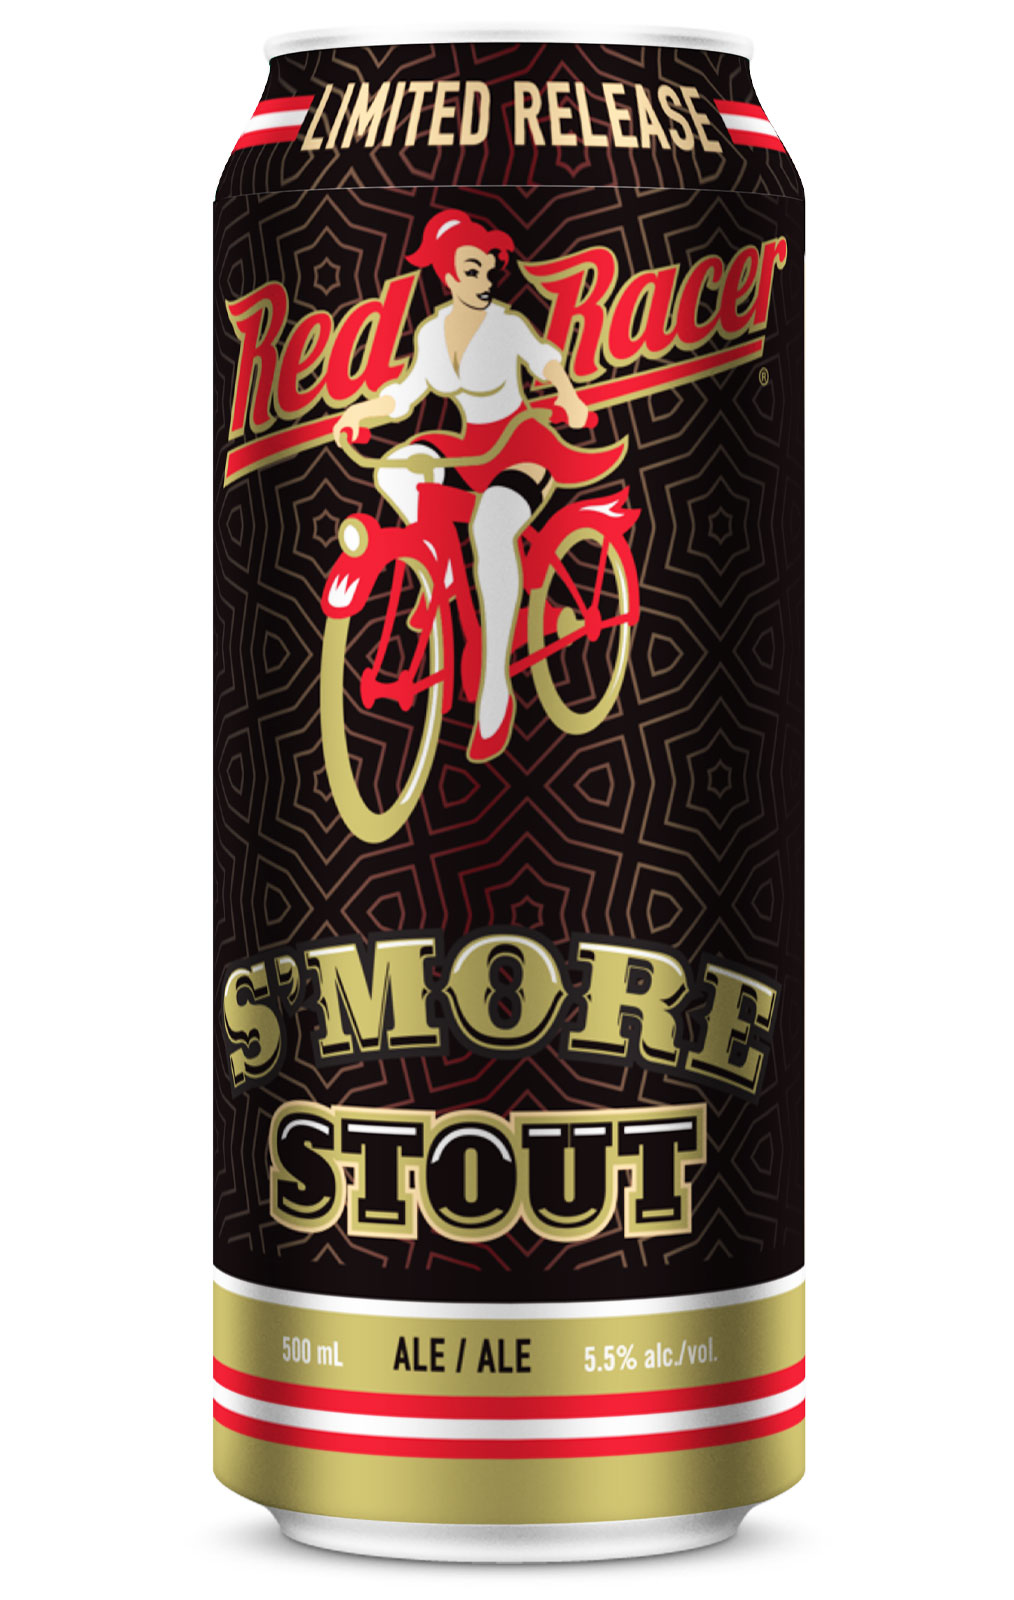 red-racer-smore-stout-product-image.jpg